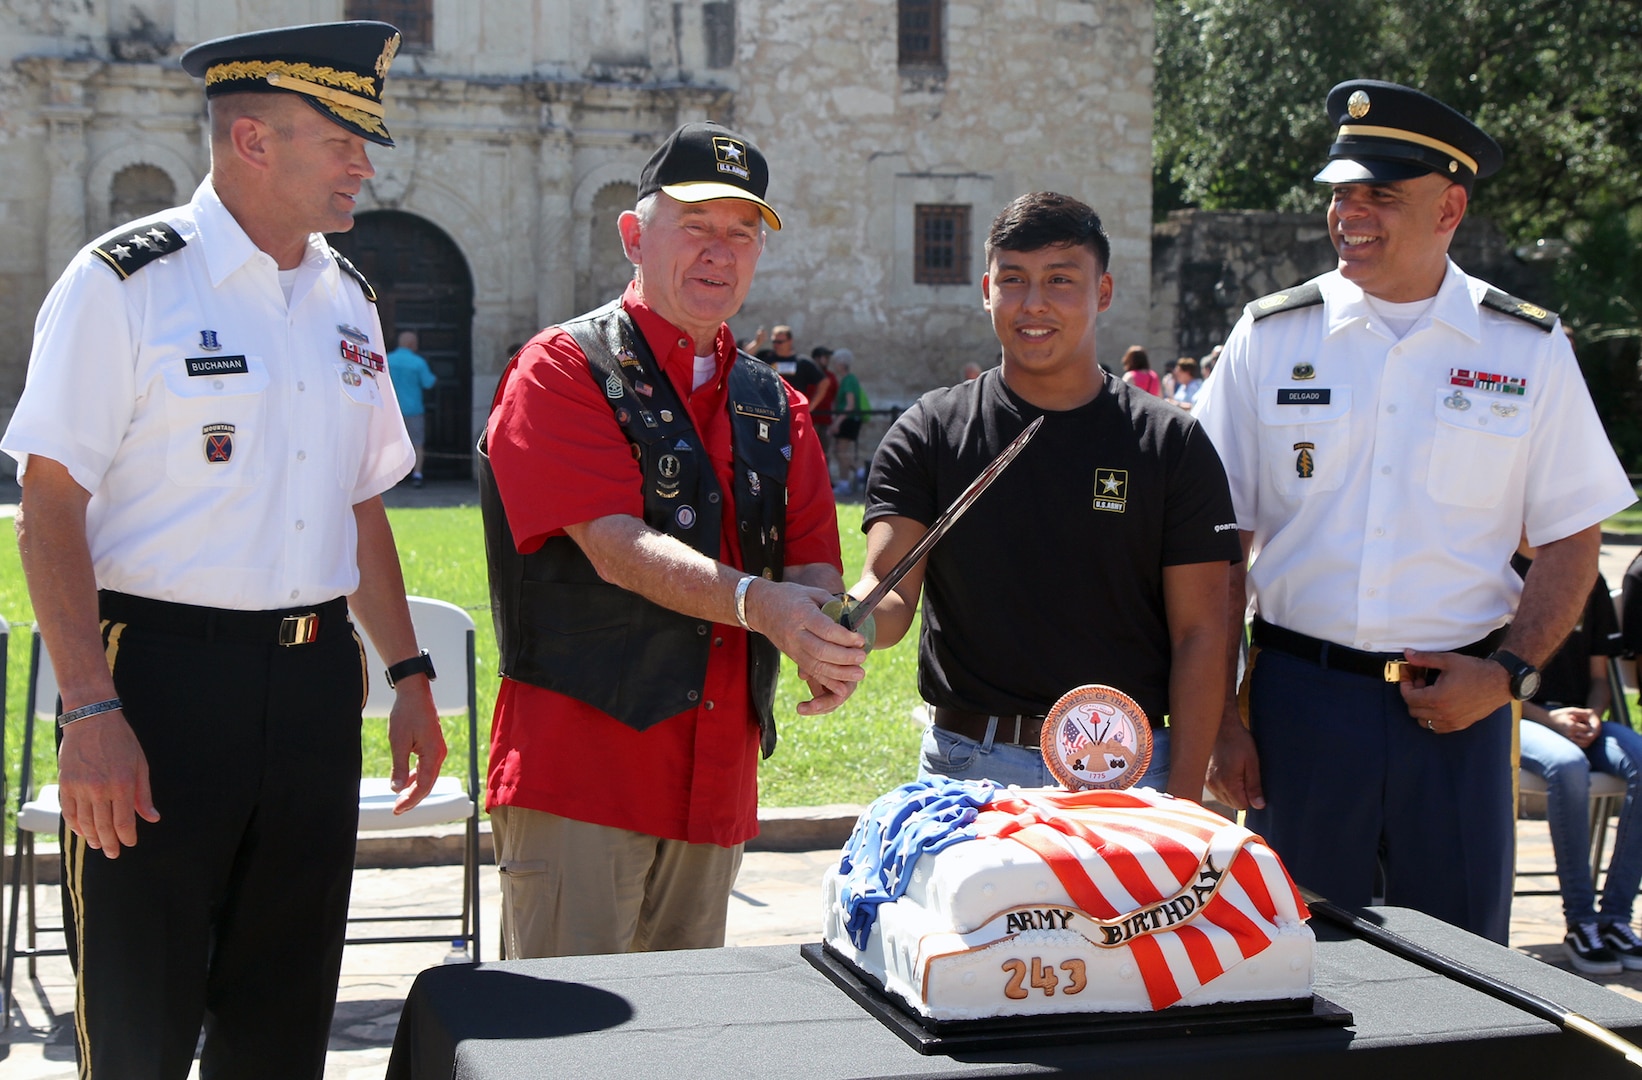 Command Sgt. Maj. (Ret.) Ed Martin, 2nd from left, and Brandon Alvarez, a 2018 graduate of East Central H.S., grasp the saber as they prepare to cut the Army Birthday cake in front of the Alamo on June 14.  The U.S. Army Recruiting Battalion San Antonio marked the Army’s 243rd Birthday with a small ceremony at the historic site.  In keeping with tradition, the oldest Army veteran present, Martin, and the youngest Army Soldier, Ramirez, made the first cut in the cake.  Alvarez took the Oath of Enlistment during the ceremony and is slated to depart for basic training later this year.  The 17-year old enlisted as a Human Resource Specialist.  Also pictured are Army Lt. Gen. Jeffrey S. Buchanan (left) and Command Sgt. Maj. Alberto Delgado (right), the U.S. Army North (Fifth Army) command team.